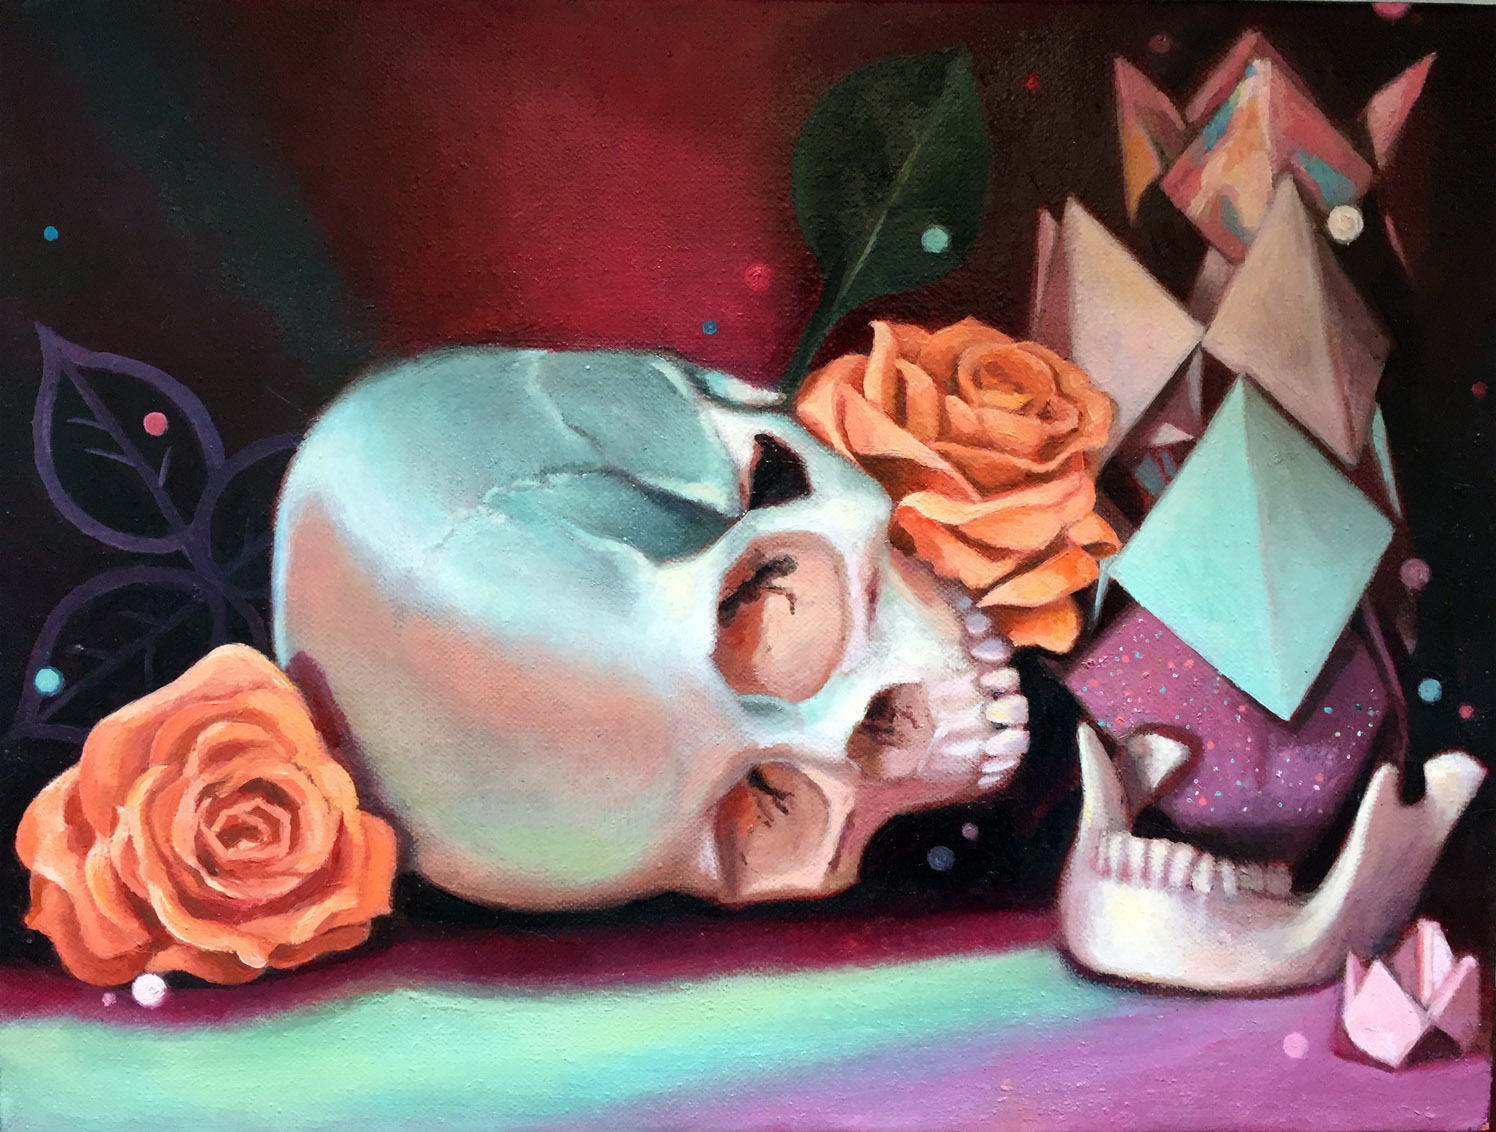 Contemporary vanitas still life oil painting by Philadelphia, PA artist Elizabeth Virginia Levesque. The top half of a white skull rests on its side in the center of the composition. In the right corner its the lower mandible. Orange roses, green leaves and a stack of colorful folded paper fortune tellers/cootie catchers frame the work. The still life is lit with surreal pink and green lighting.